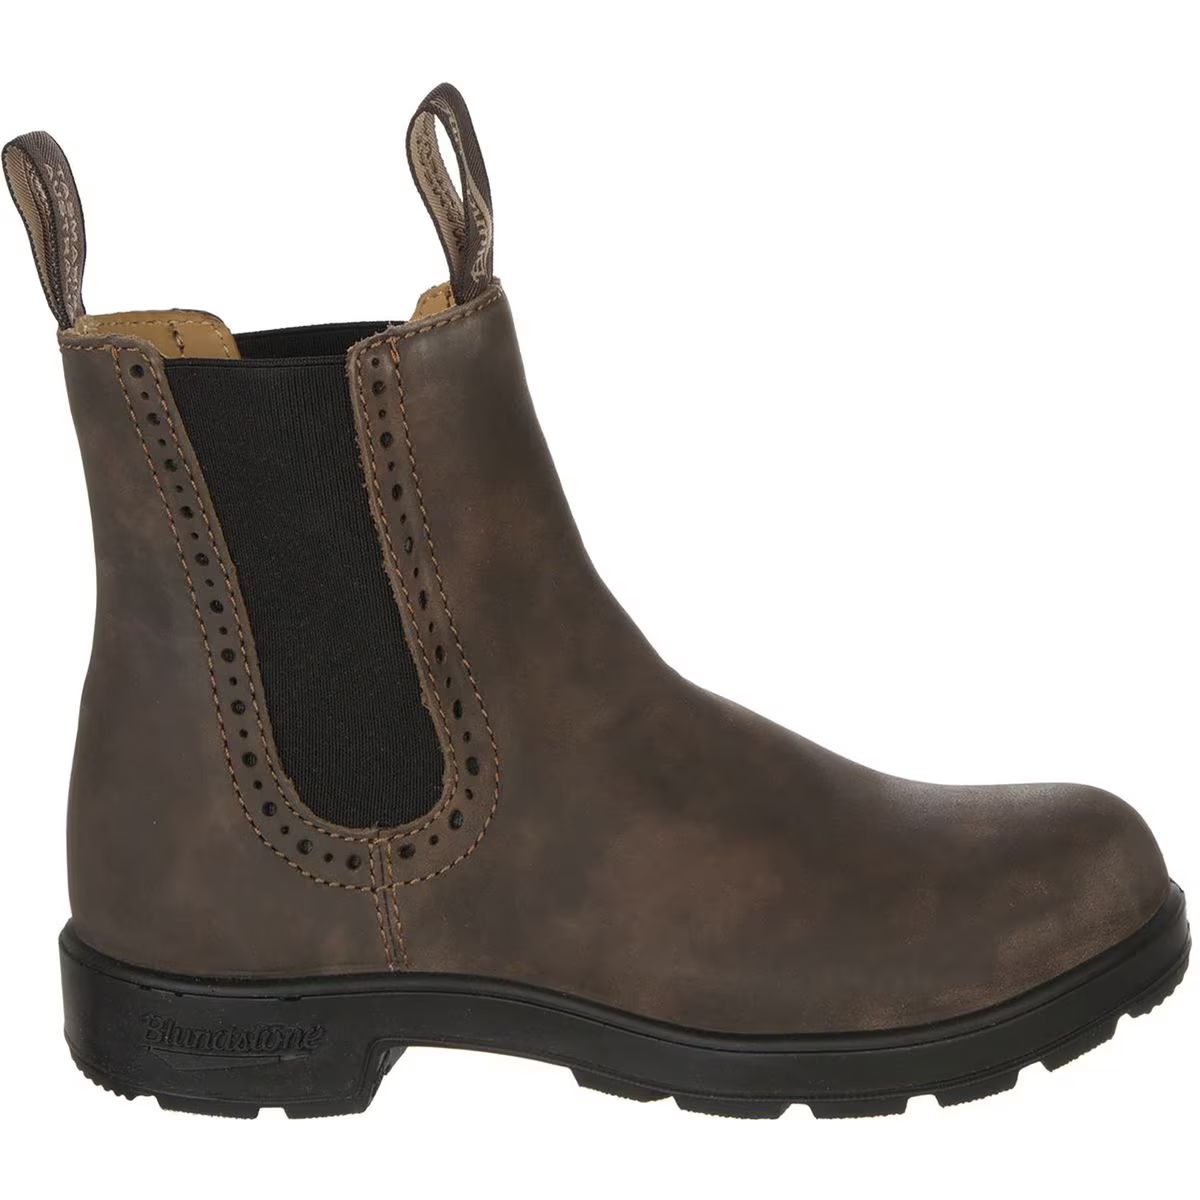 Blundstone High Top Boot - Women's | Backcountry